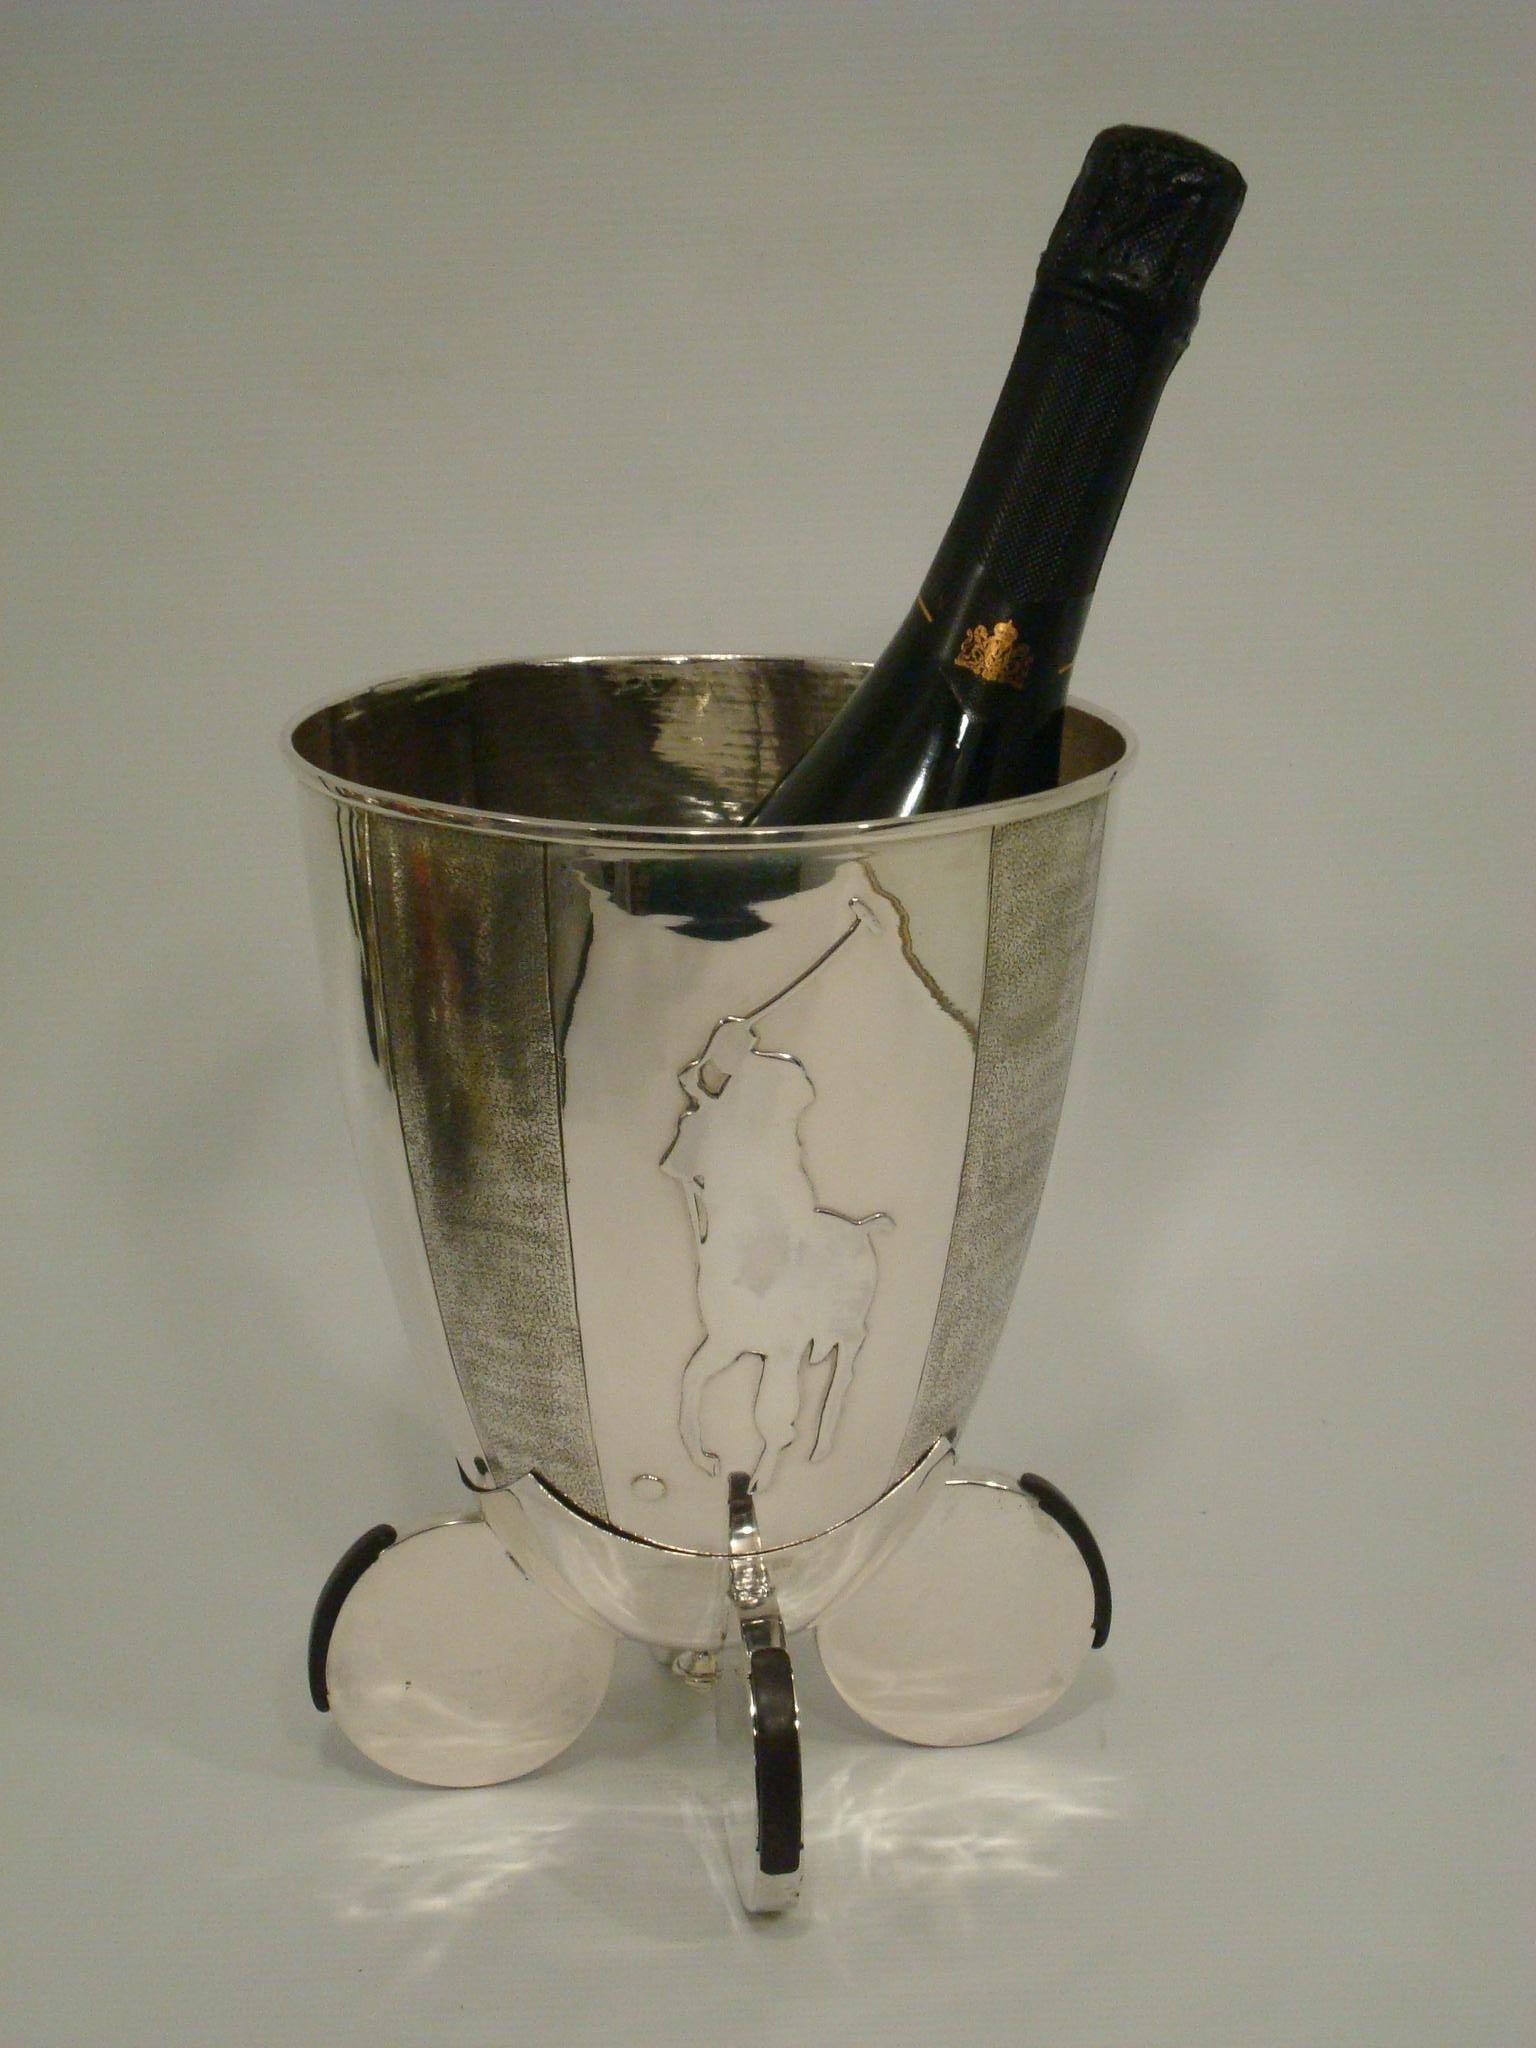 Art Deco Silver and Ebony Polo Player Wine or Champagne Cooler  1920´s.
Perfect to use as a Trophy - Cup. 
Marked 900 Silver.